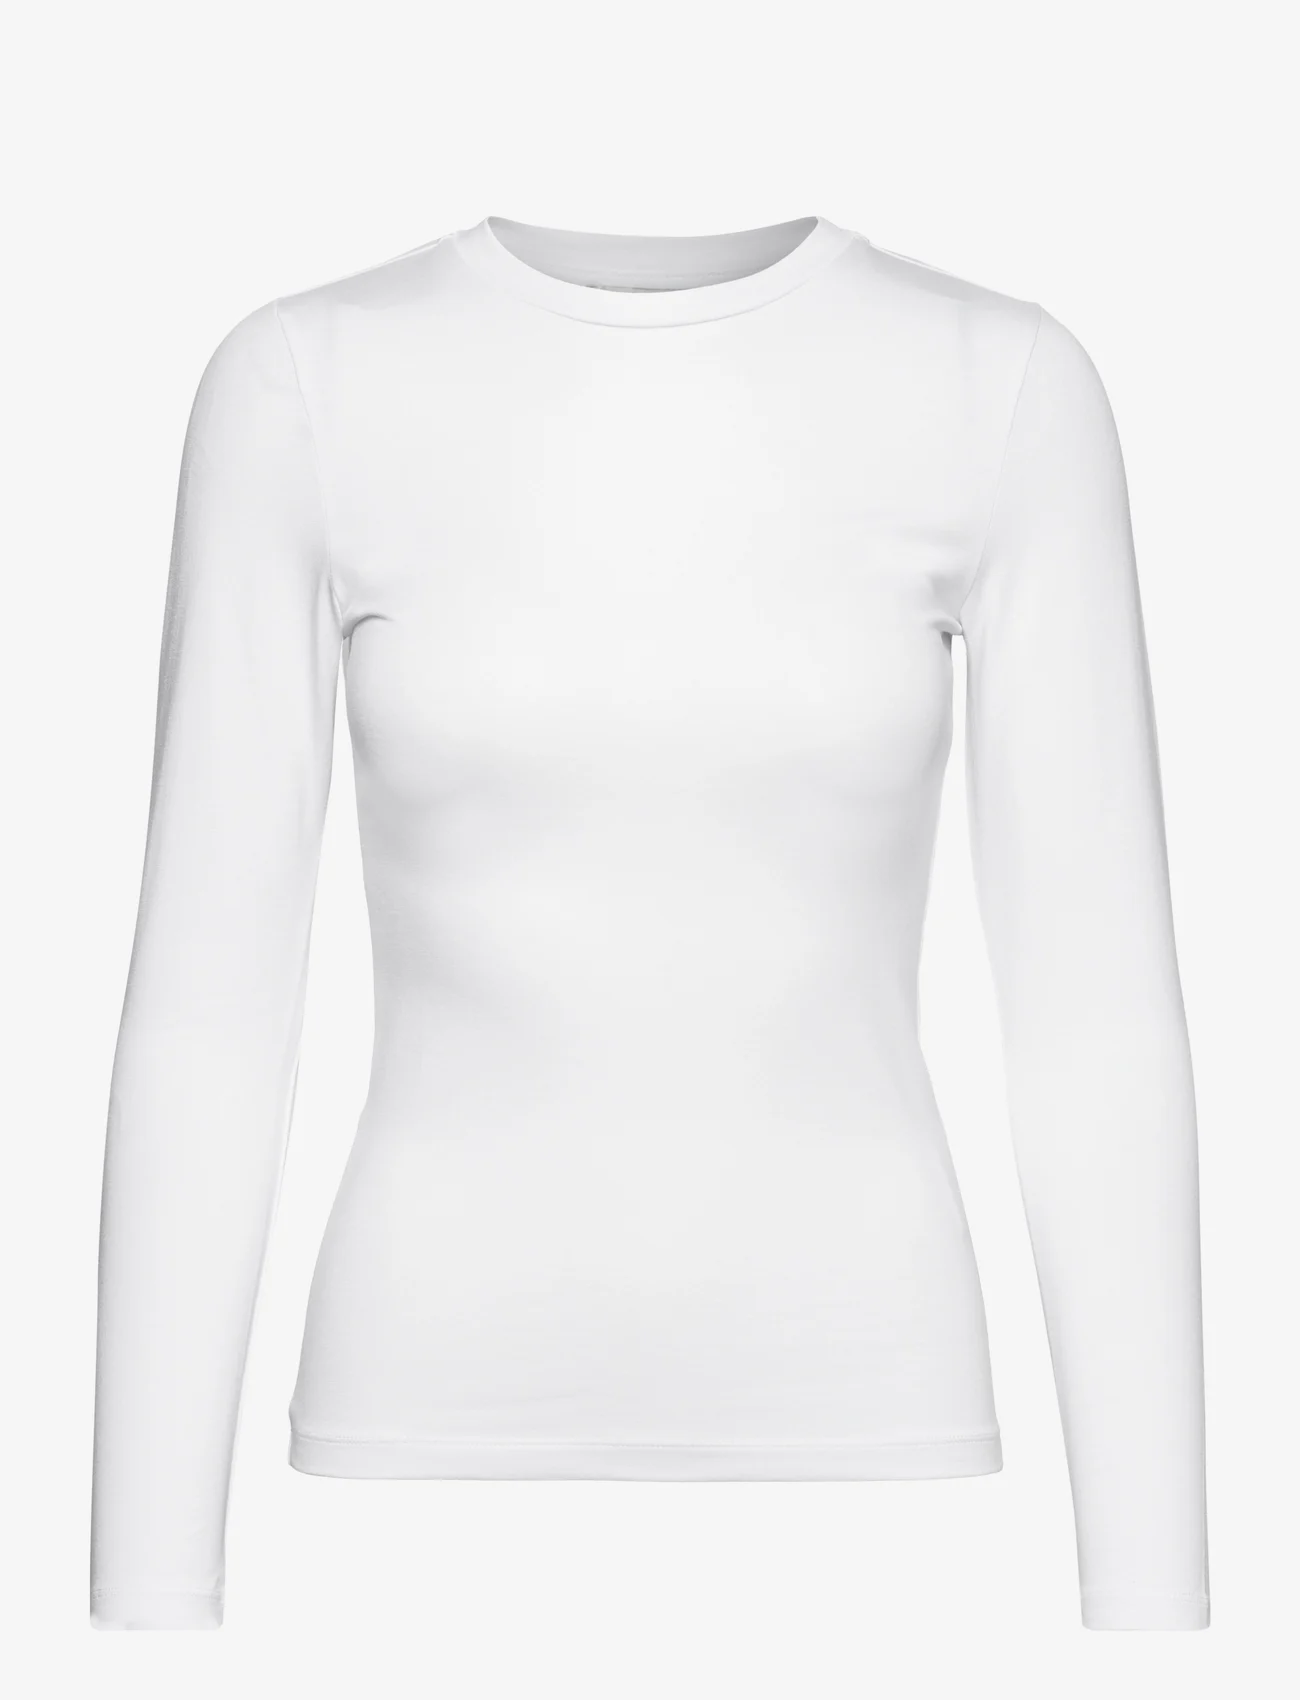 A-View - Stabil top l/s - long-sleeved tops - white - 0